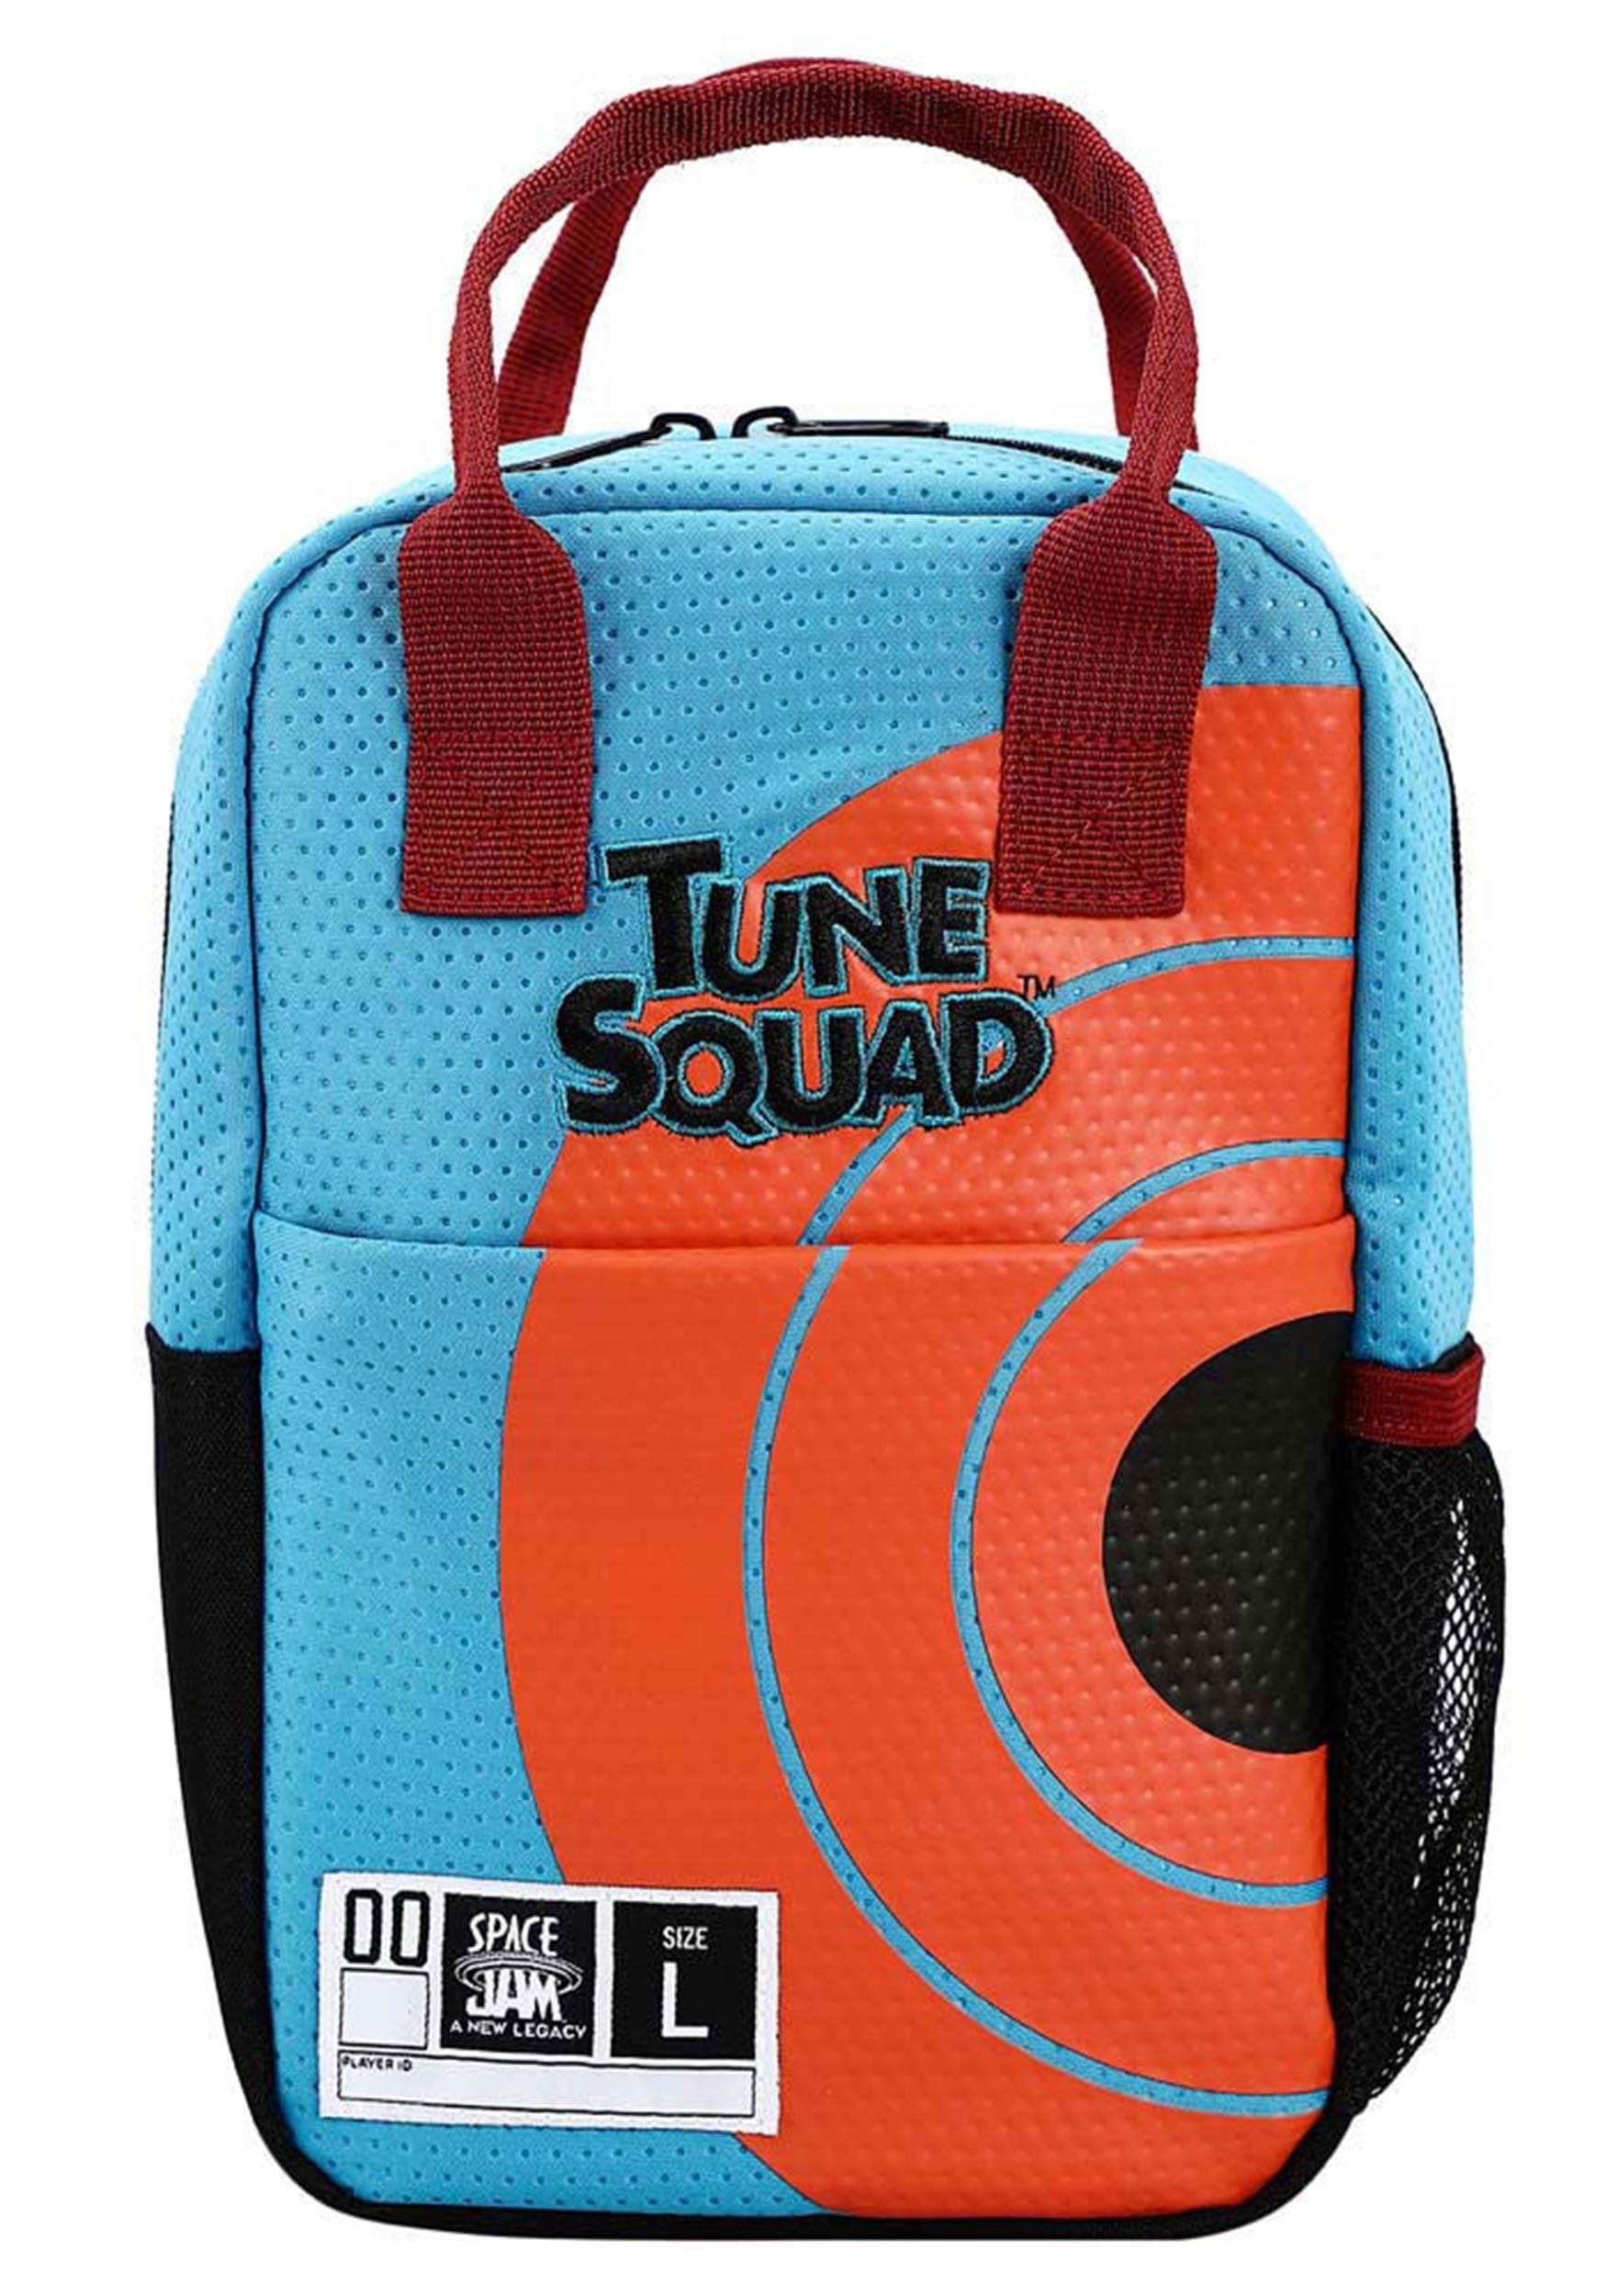 https://images.fun.com/products/77790/1-1/space-jam-tune-squad-insulated-lunch-bag.jpg